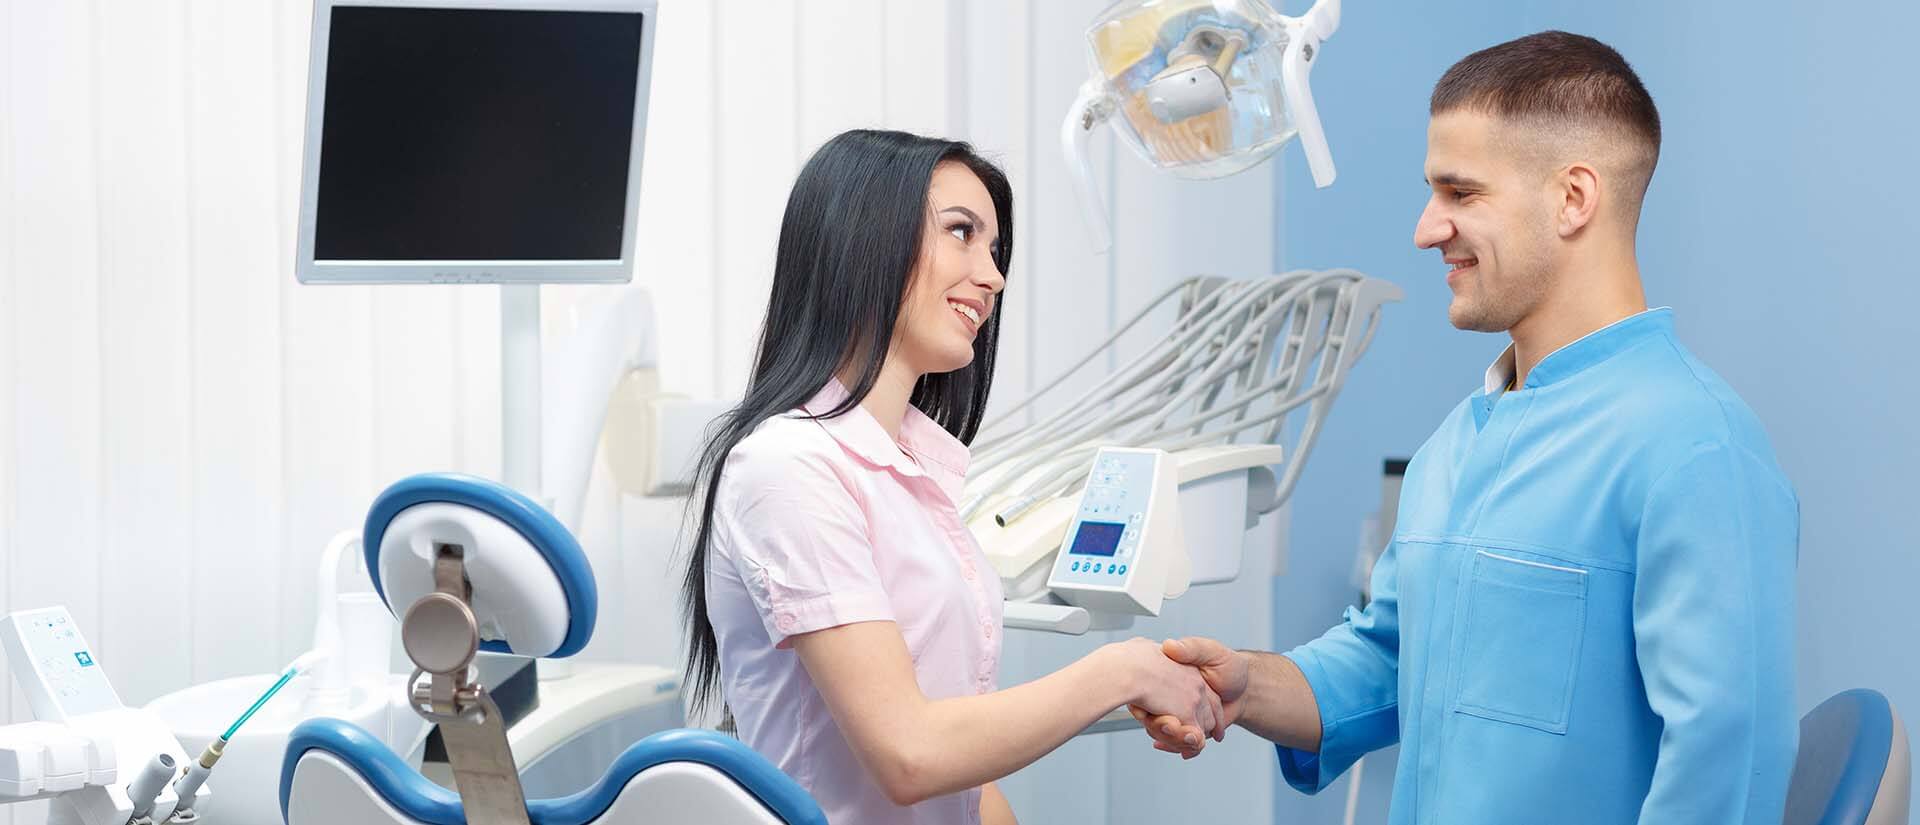 A woman shaking hands with a dentist